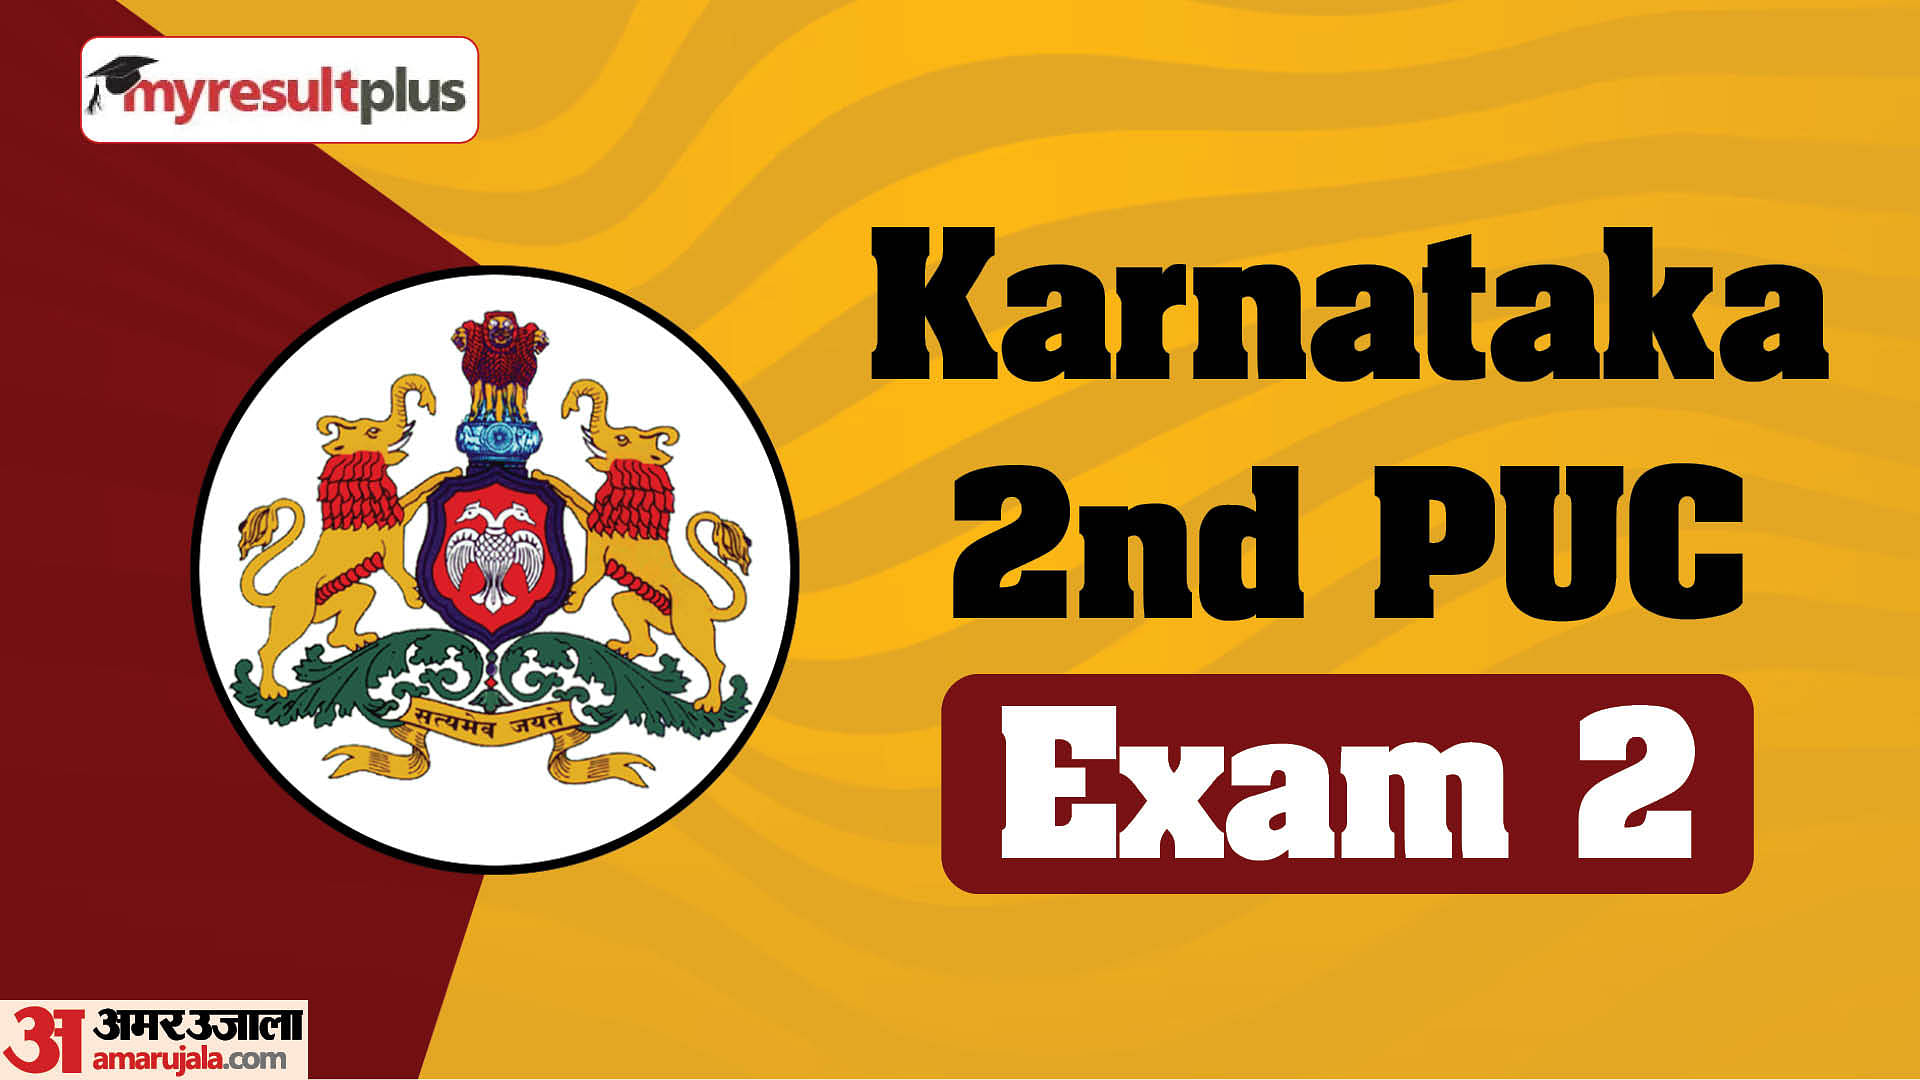 Karnataka 2nd PUC Exam 2 hall ticket out now, Read more details and steps to download here